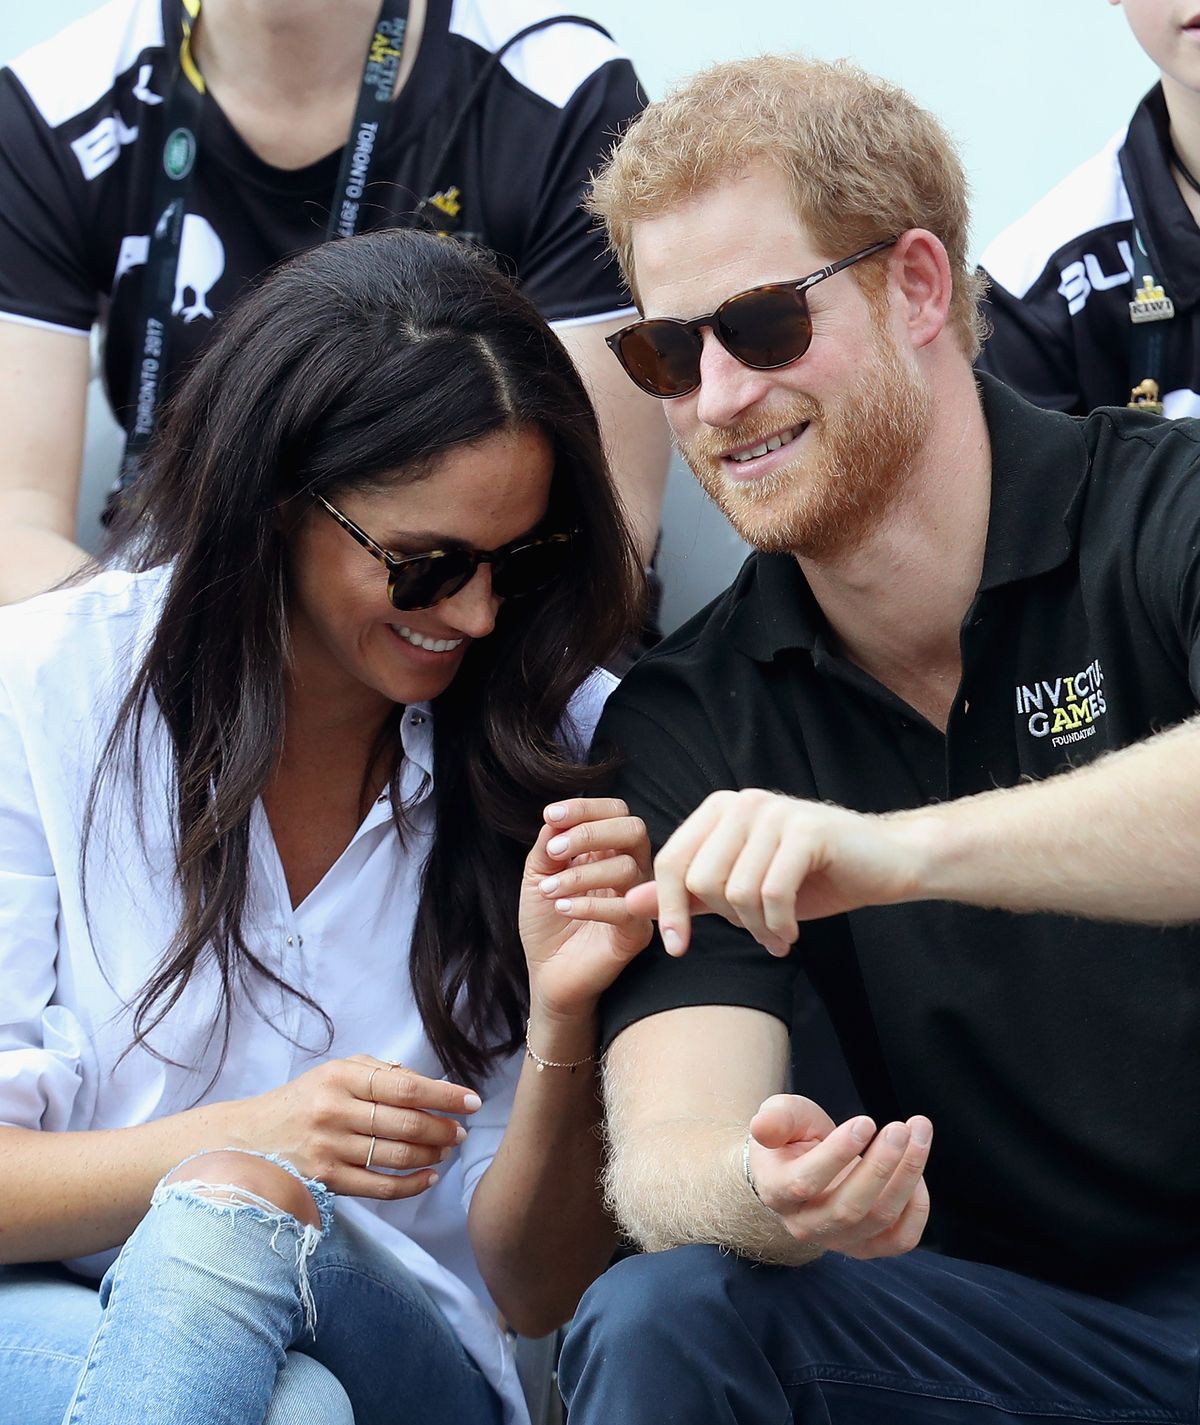 Duchess Meghan and Prince Harry at a Wheelchair Tennis match during the Invictus Games on September 25, 2017, in Toronto, Canada | Photo: Chris Jackson/Getty Images